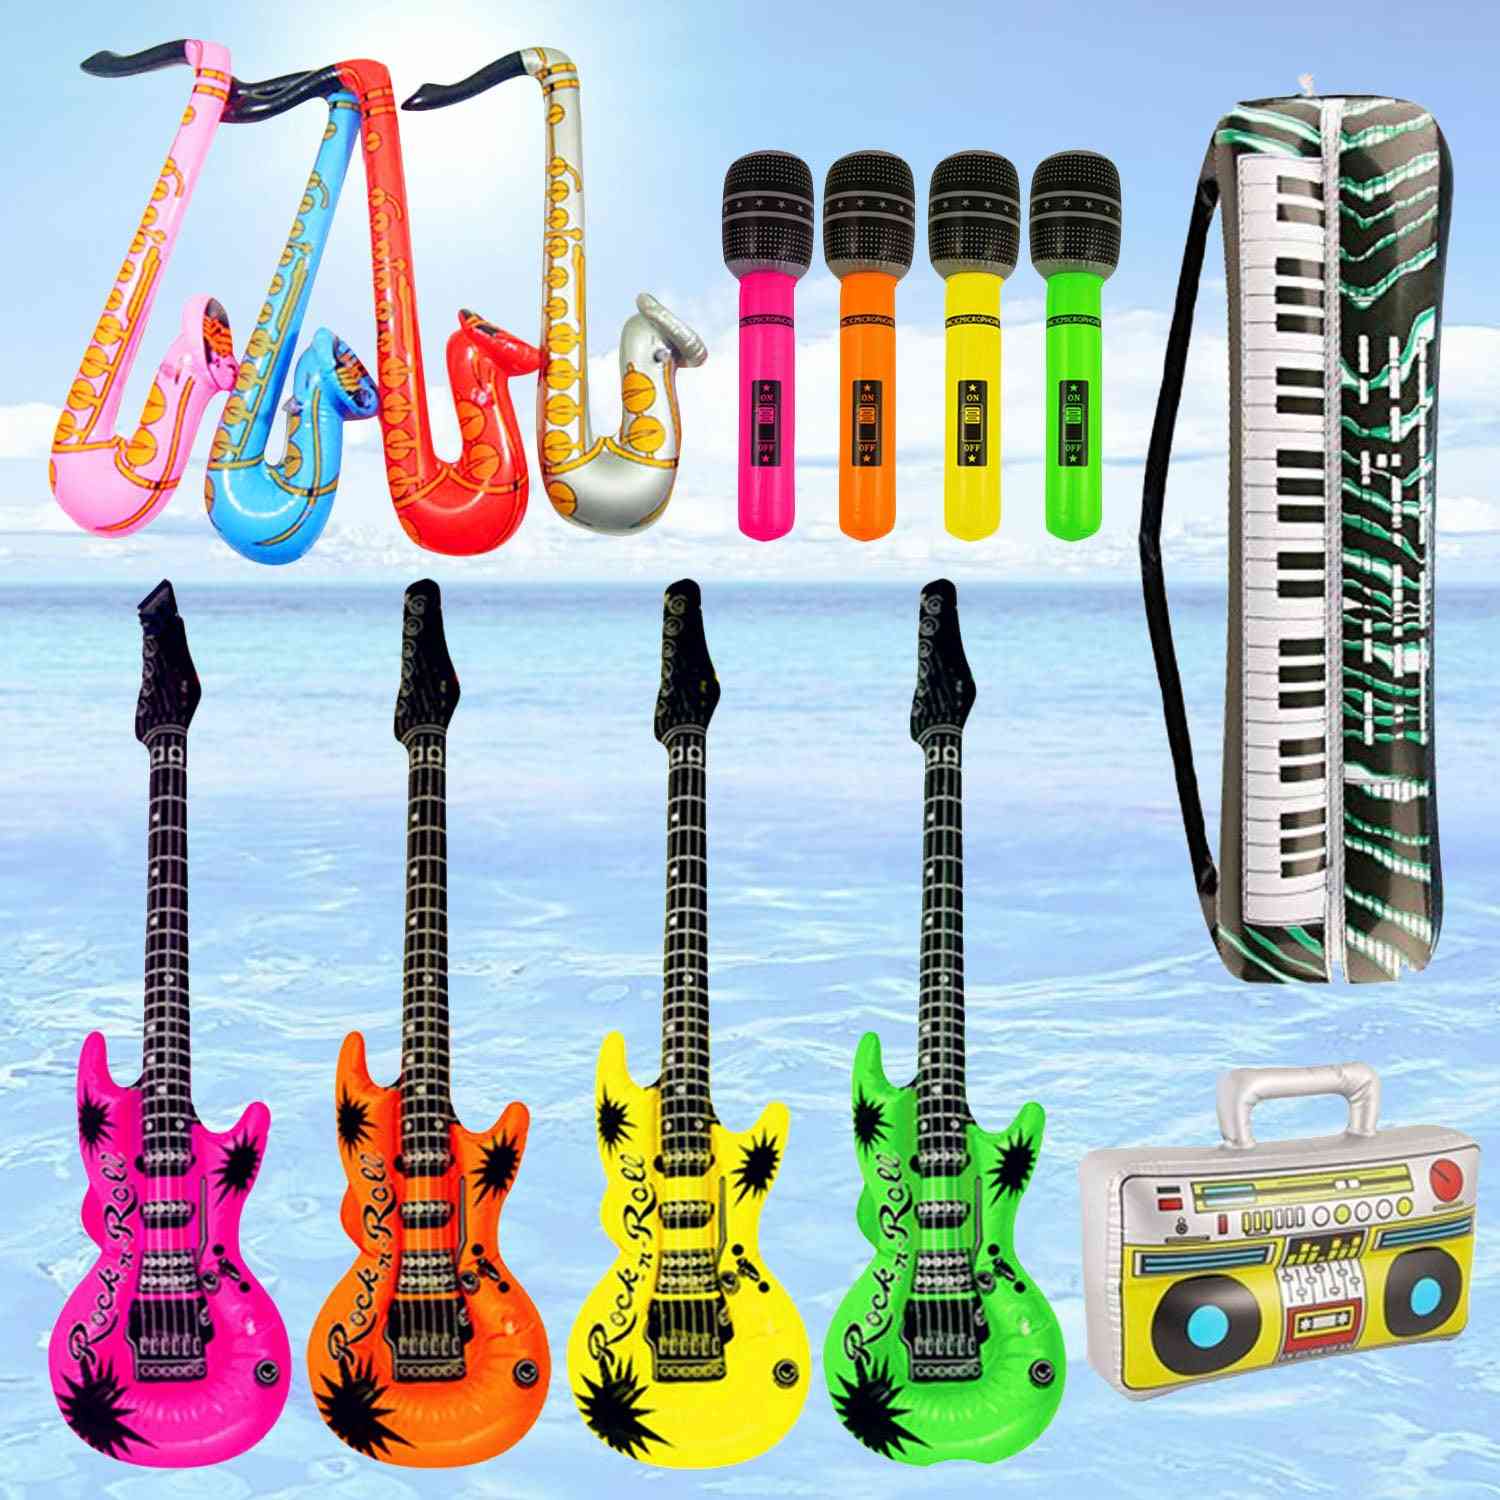 Inflatable Guitar, Saxophone, Microphone, Keyboard, Musical Balloons, Instruments Toy